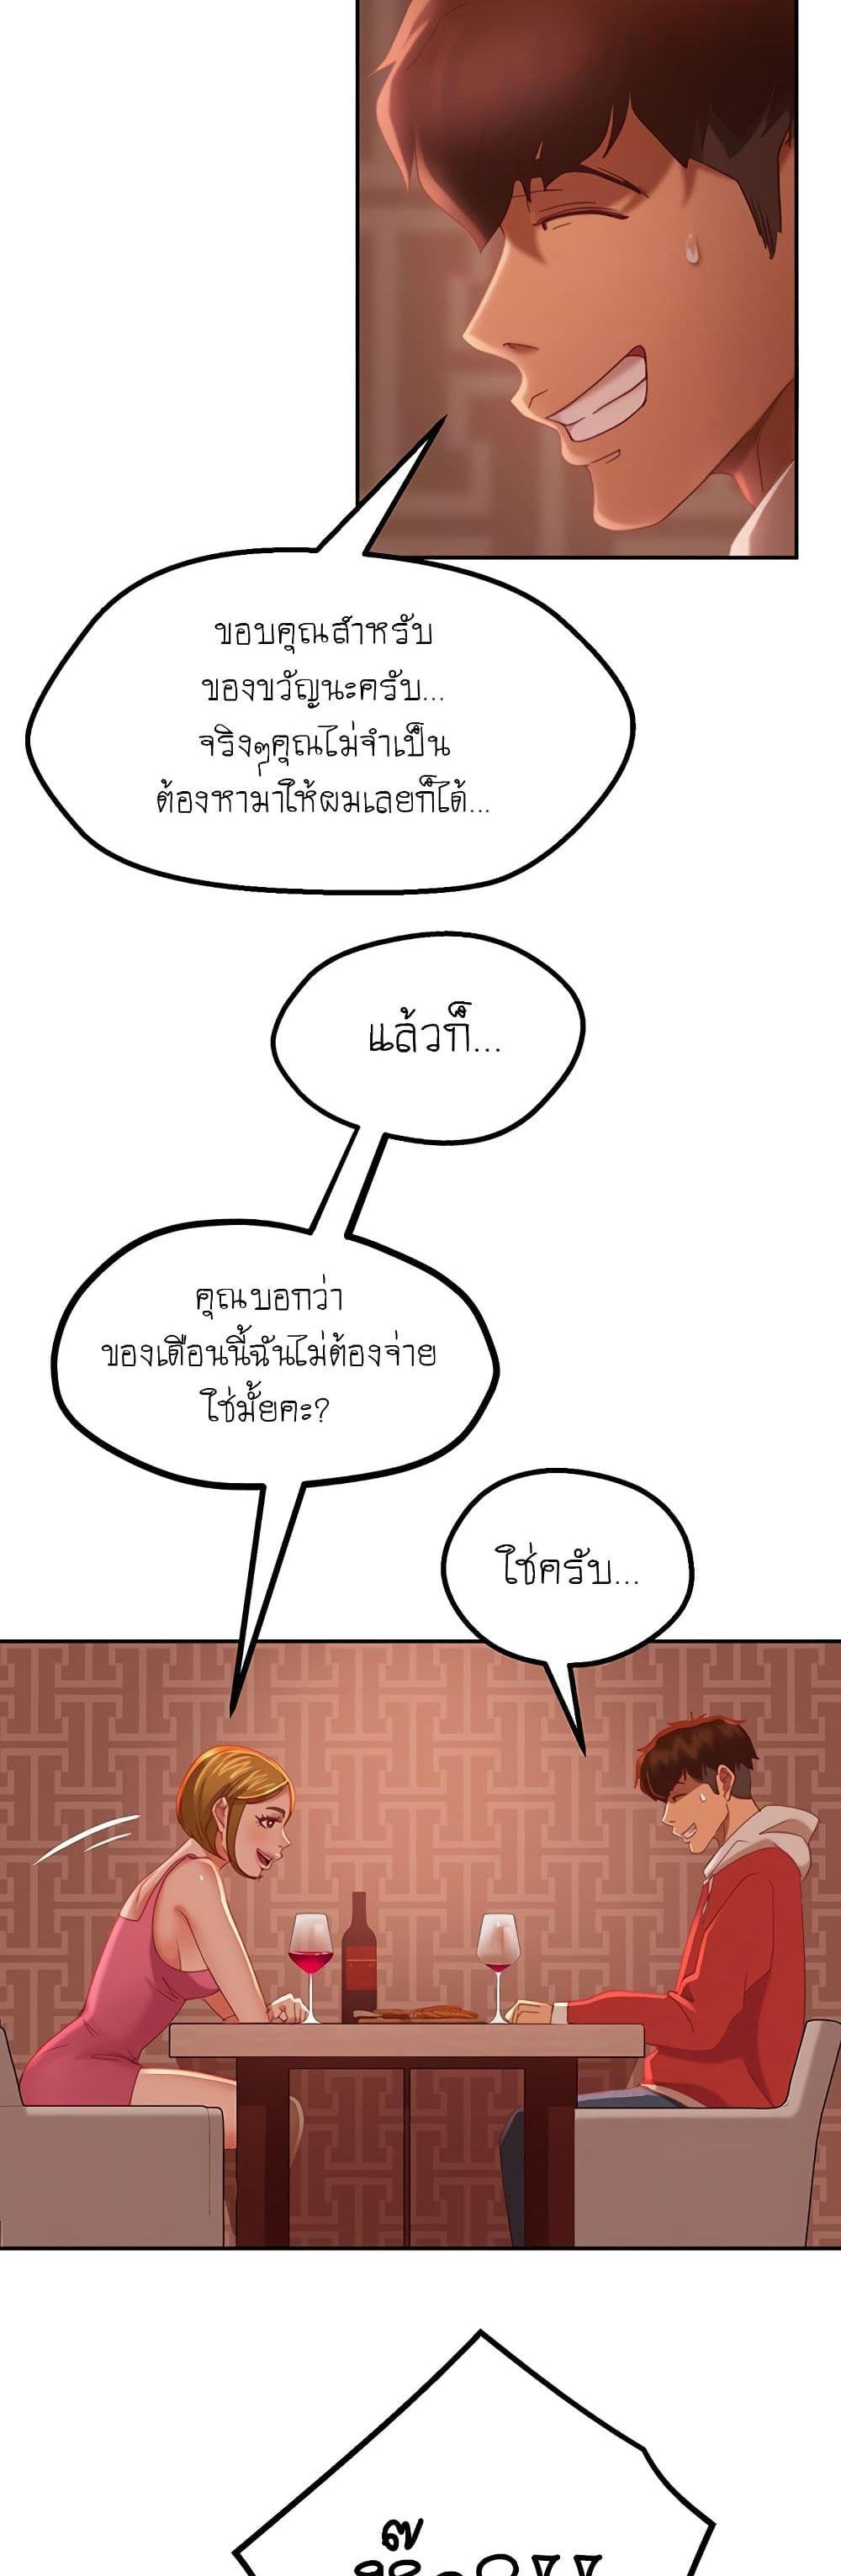 A Twisted Day 4 ภาพ 12